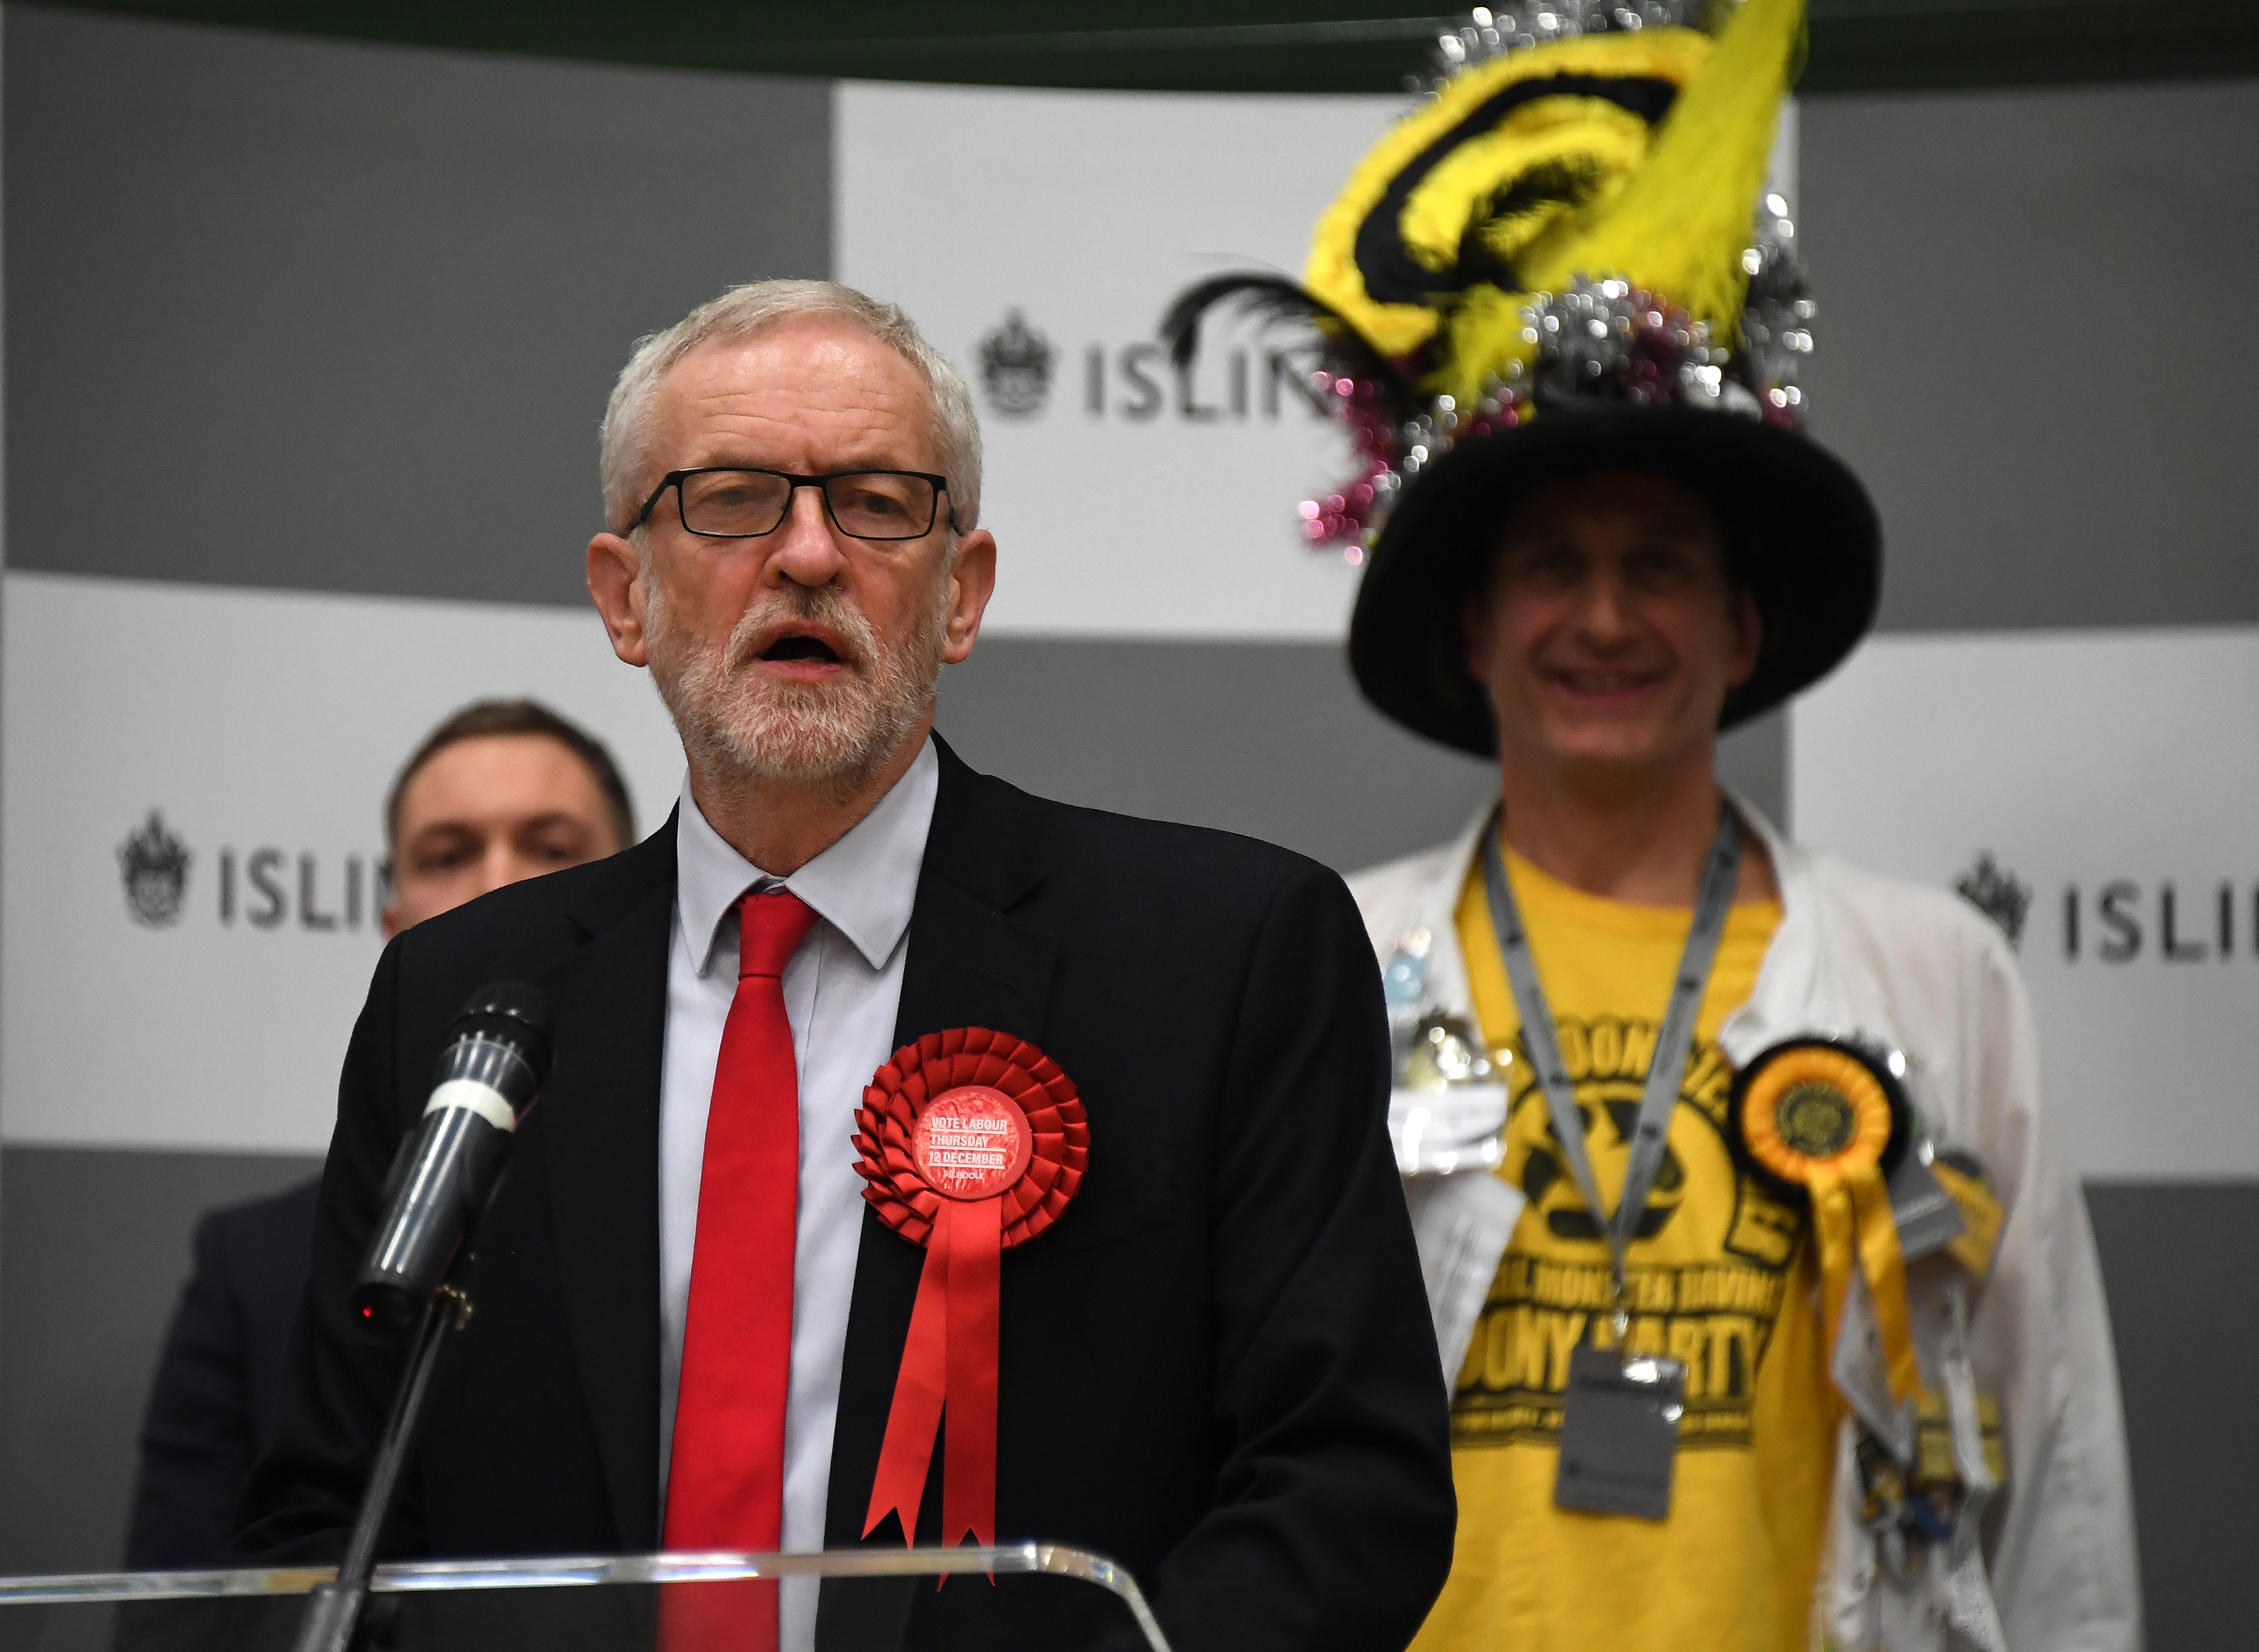 Corbyn pictured after winning the Islington North seat at the 2019 general election. He has held the seat since 1983